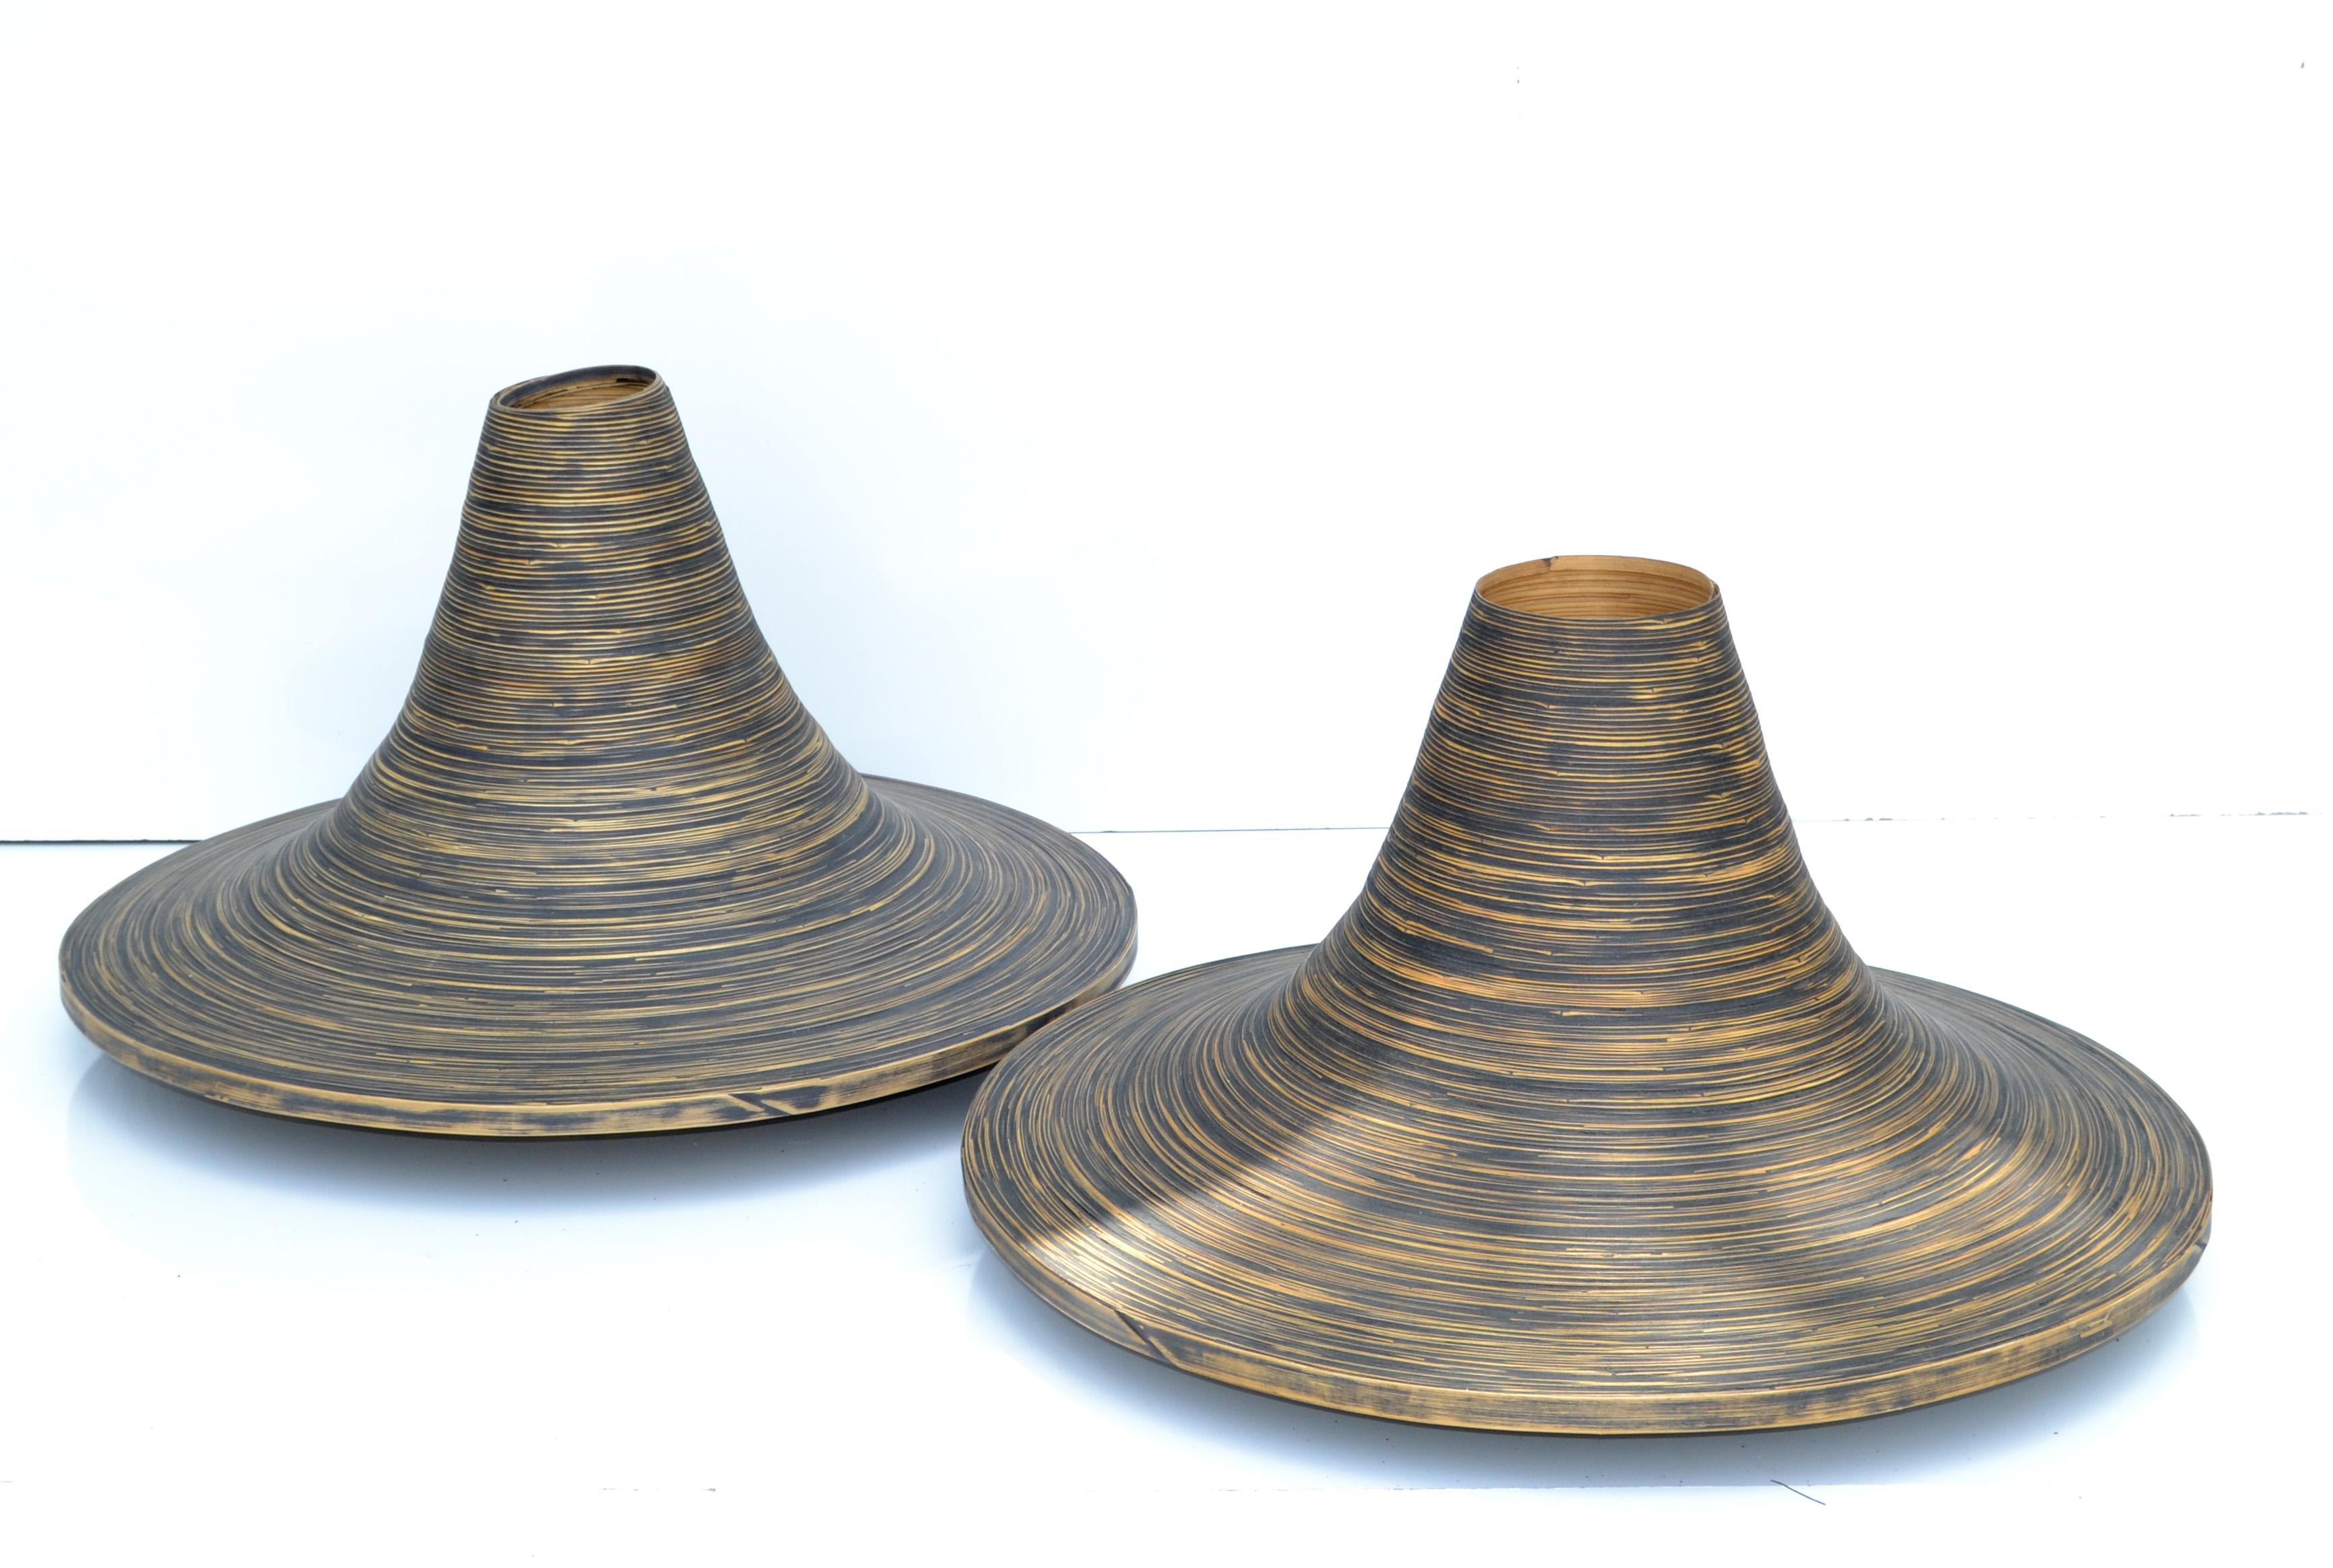 Dark Brown Finish decorative indoor planters in swirled cane into this cone shaped Vessel.
Coming from a famous Florist in Paris, France.
The wood's natural coloring show of tones ranging from light beige, Taupe to  a dark brown striped with